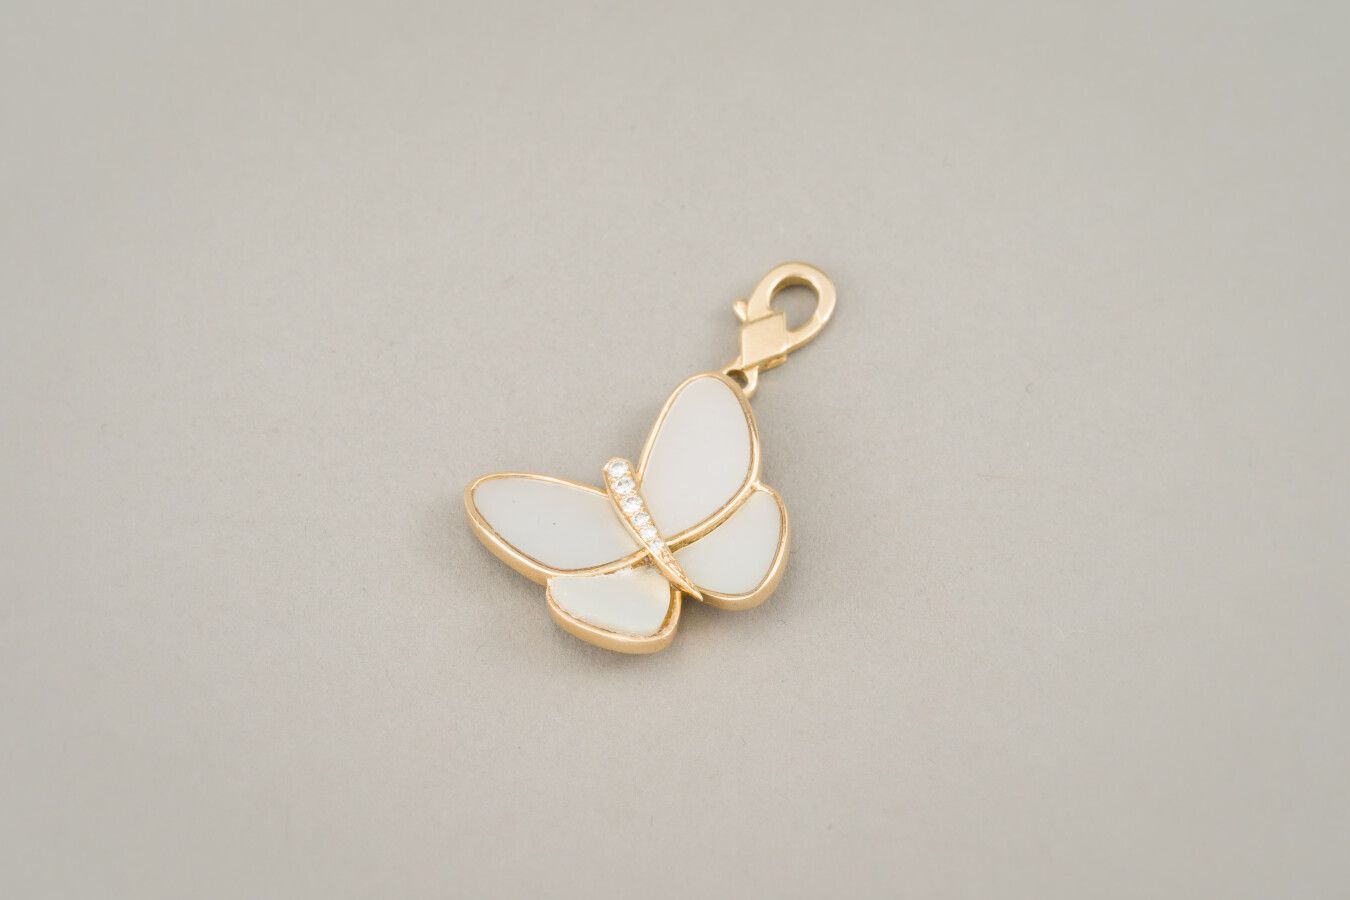 Null 91. VAN CLEEF & ARPELS :

Butterfly pendant in yellow gold 750/1000, the wi&hellip;